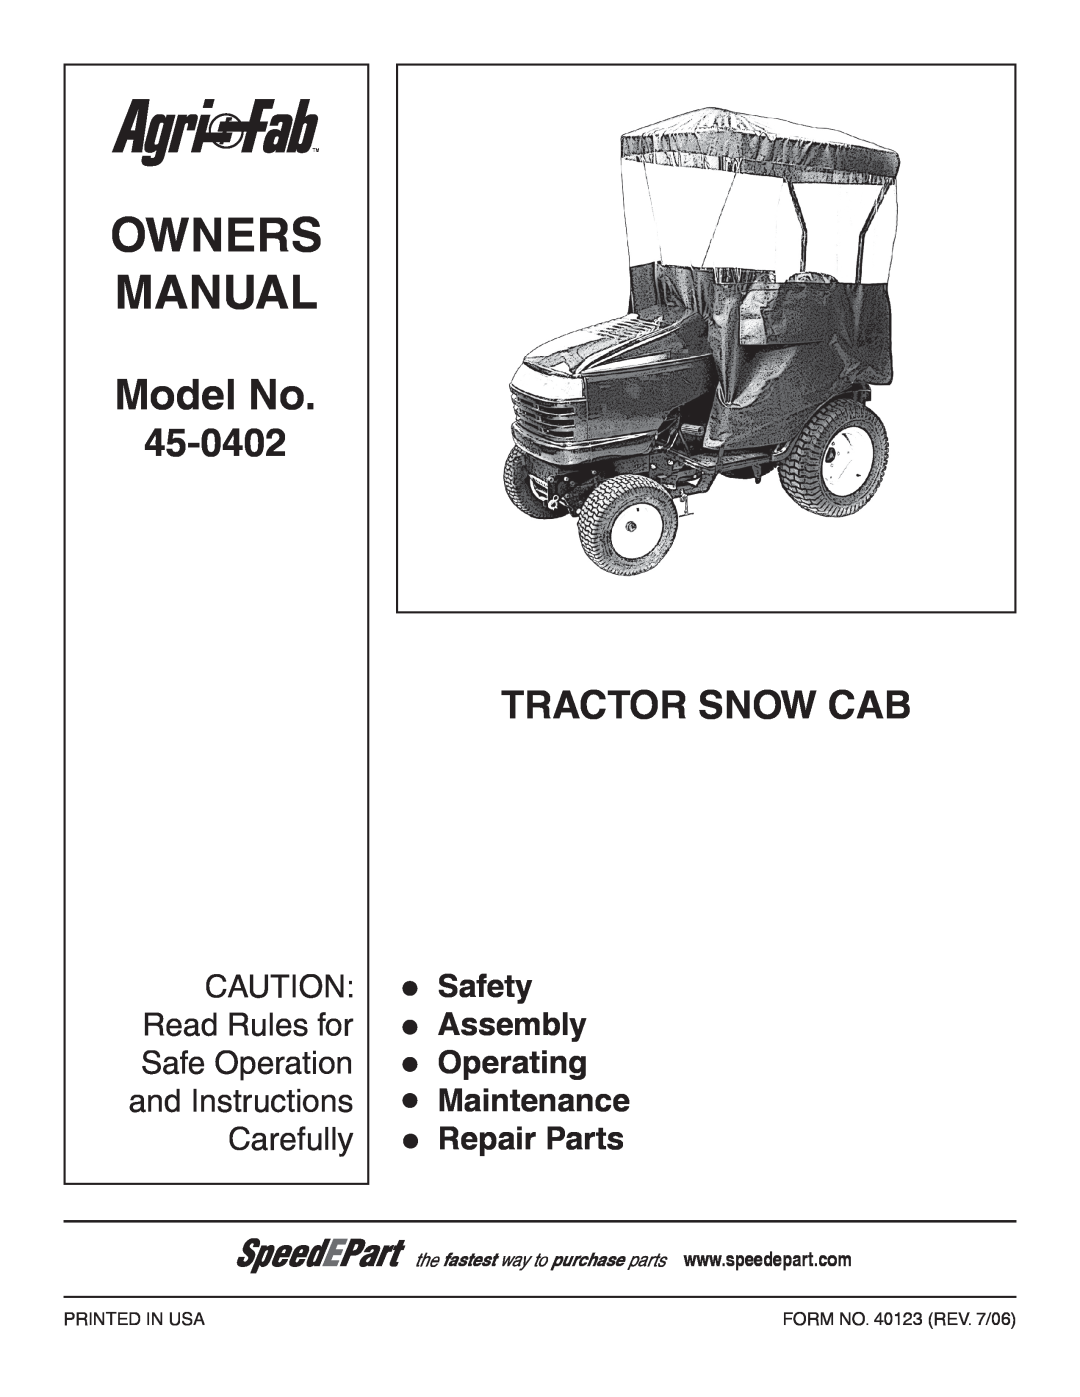 Agri-Fab 45-0402 Safety, Assembly, Operating, Repair Parts, Model No, Tractor Snow Cab, Read Rules for, Safe Operation 